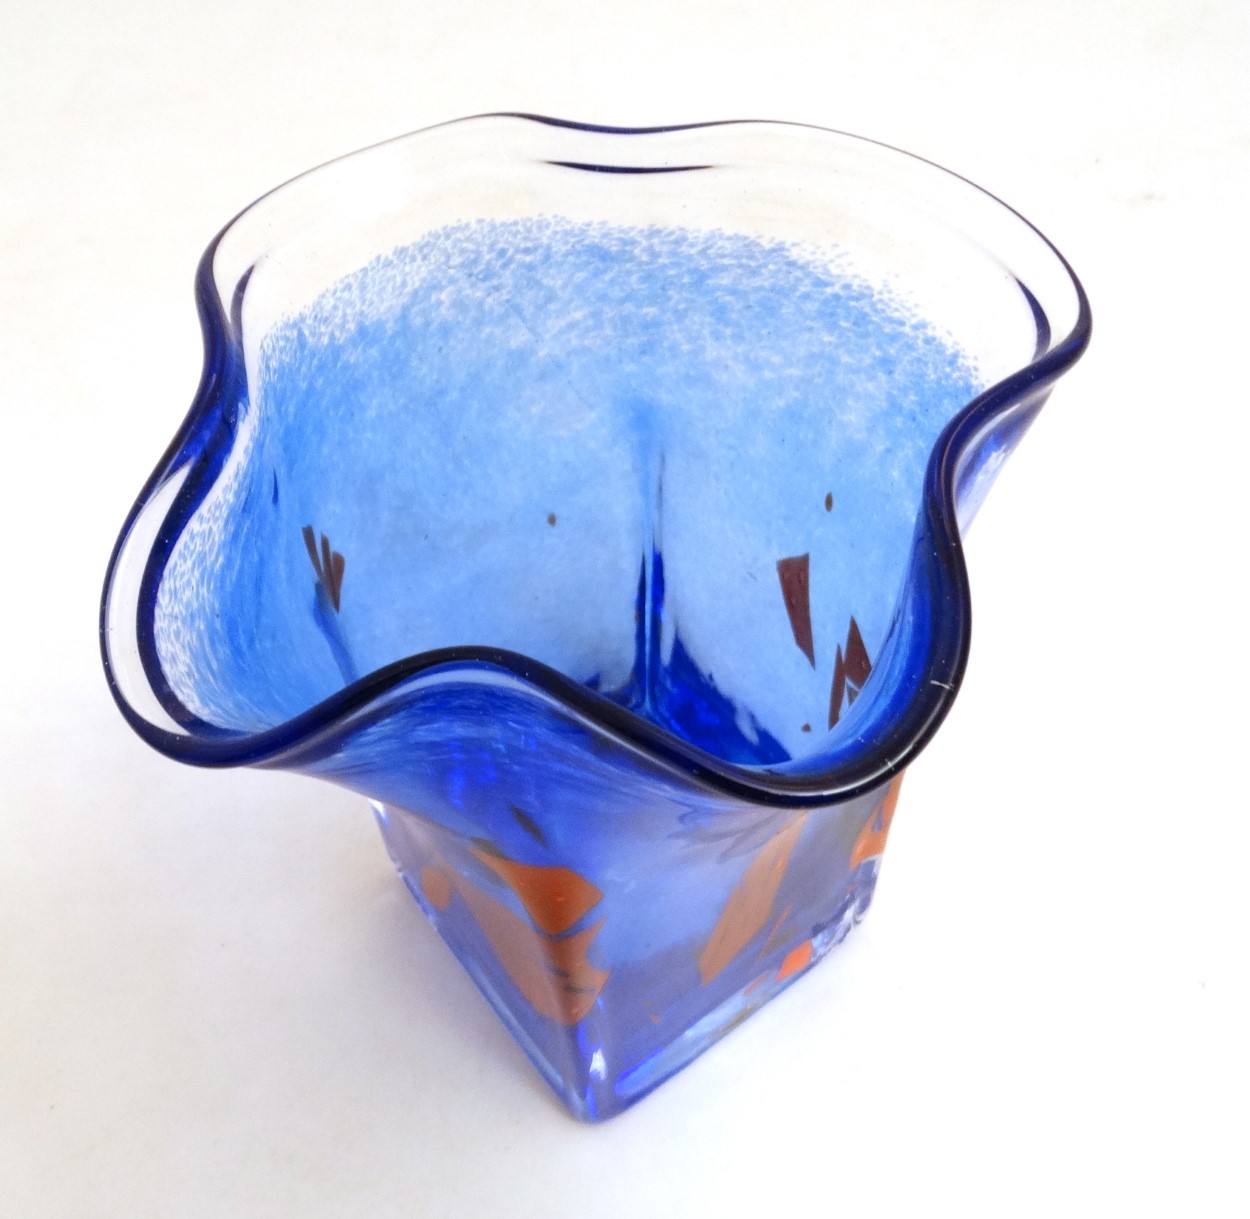 Scandinavian Studio Art glass: A blue squared vase with frilled rim and red detail by Stockholms - Image 3 of 10